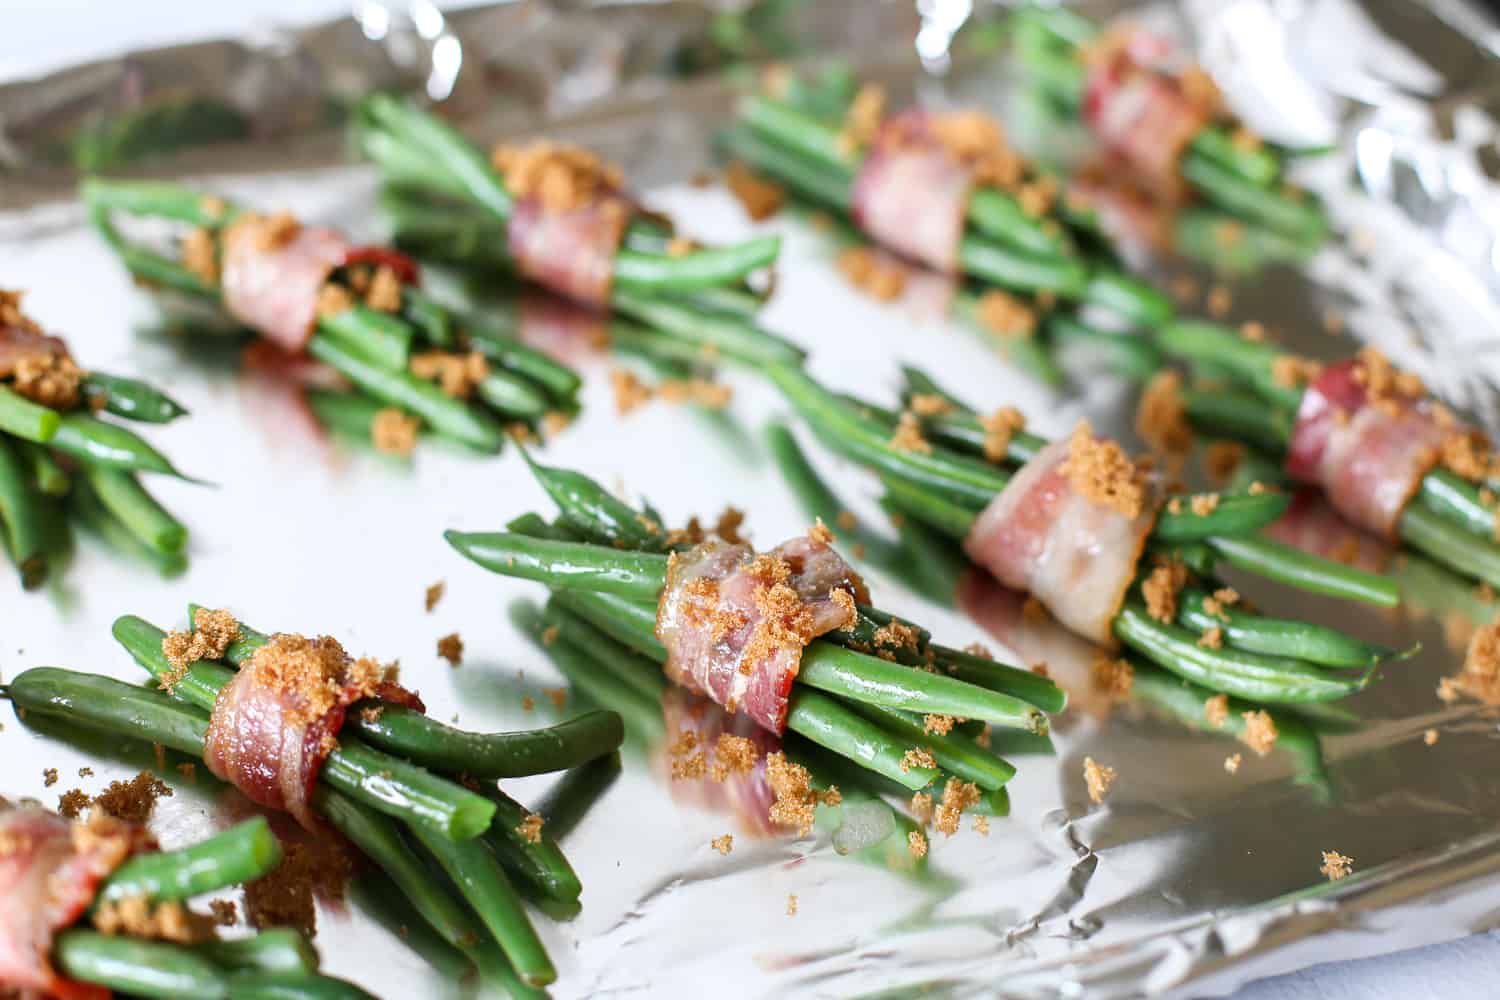 Green beans wrapped in bacon, brushed with garlic butter, and sprinkled with brown sugar before being baked.